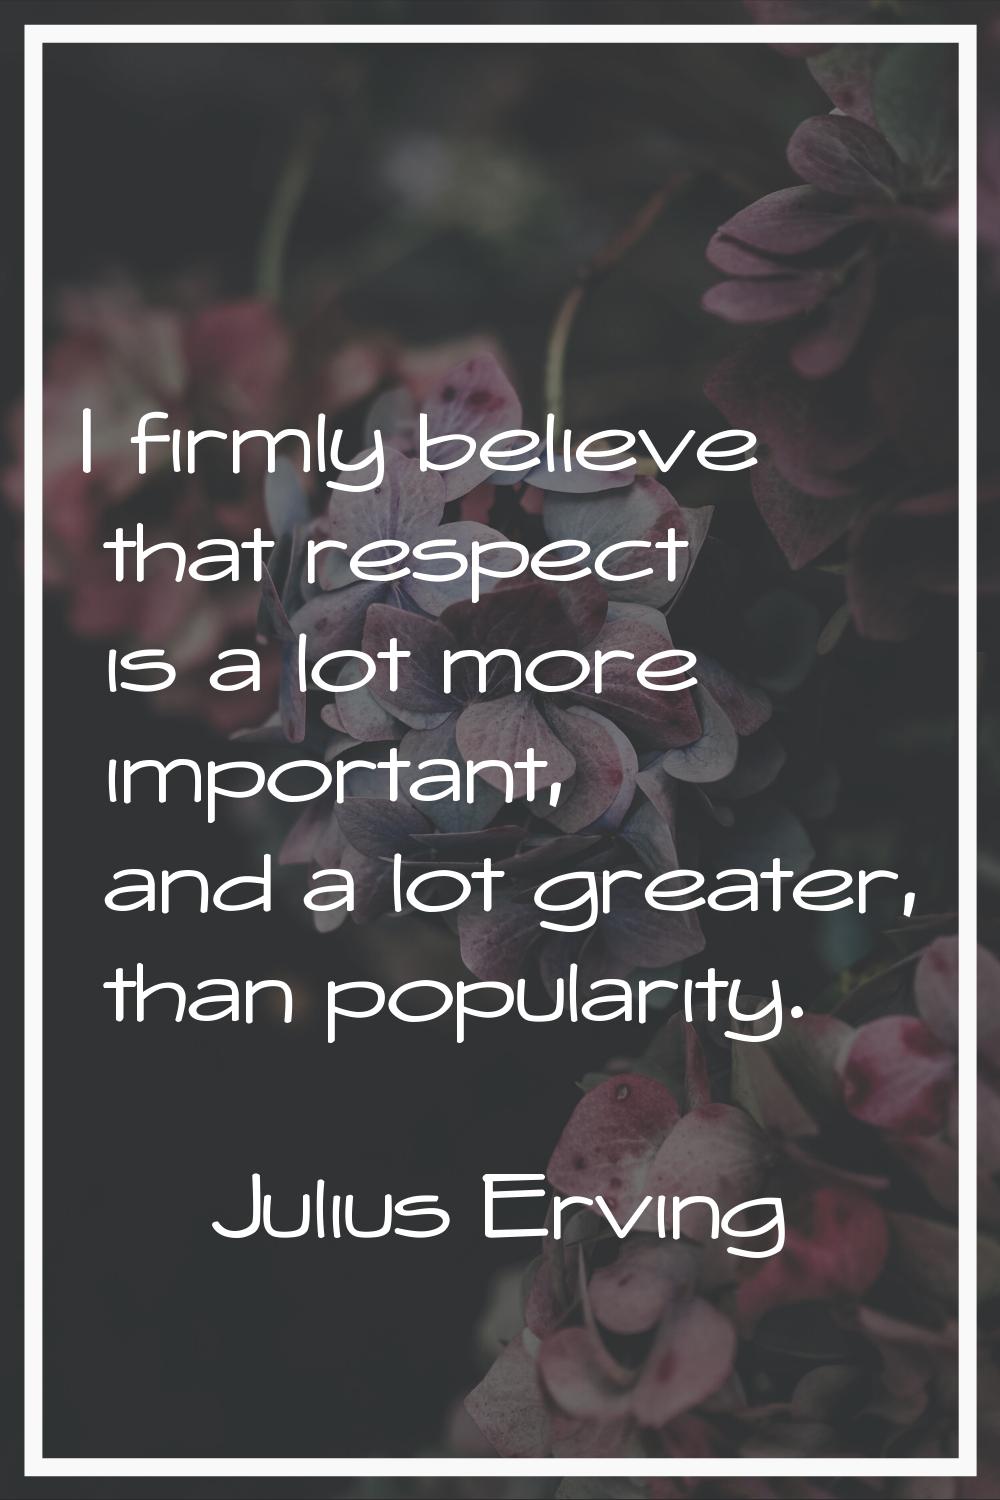 I firmly believe that respect is a lot more important, and a lot greater, than popularity.